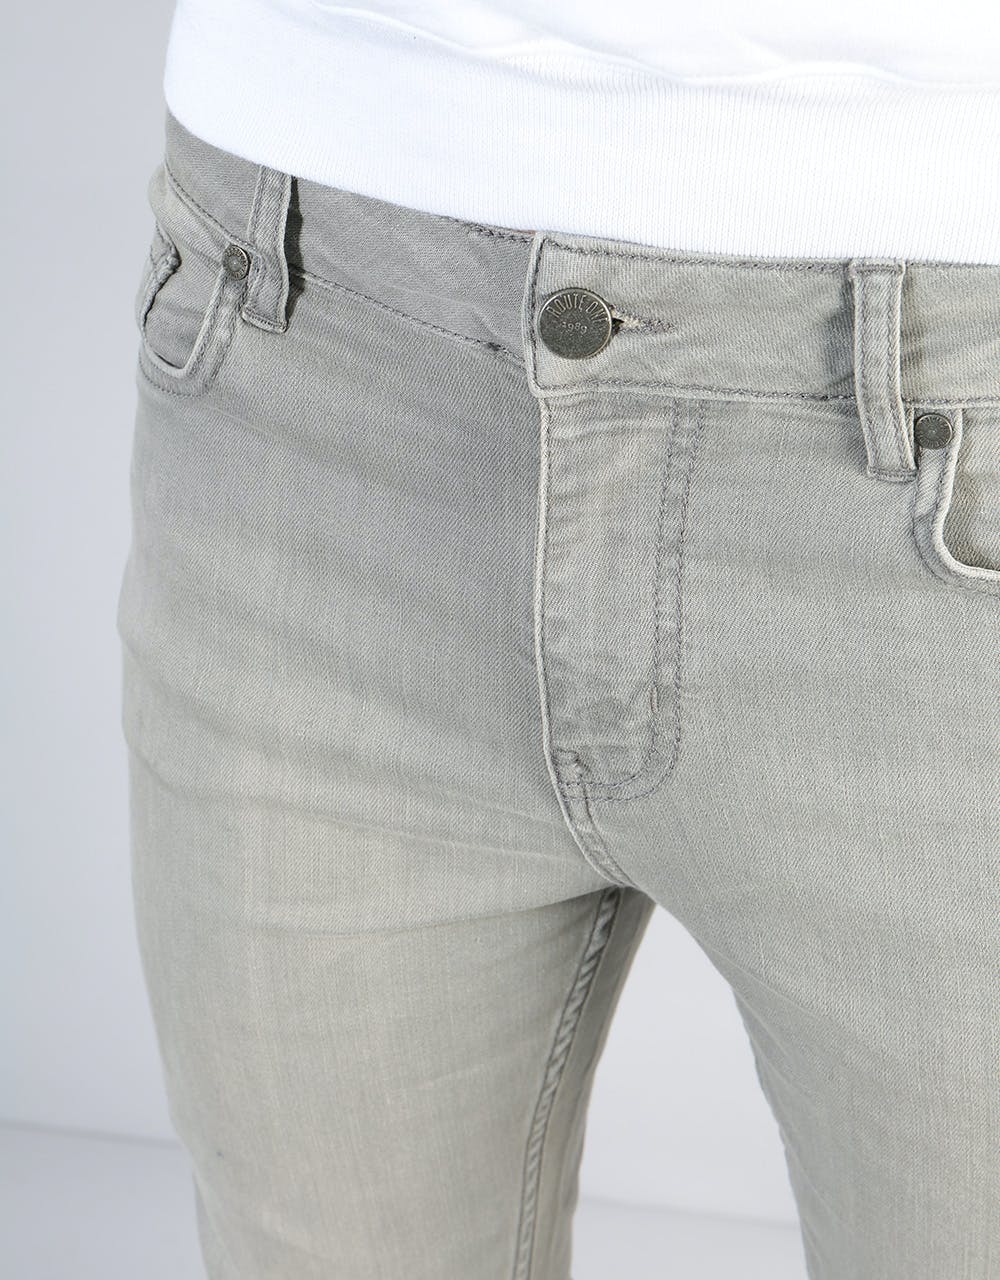 Route One Skinny Denim Jeans - Washed Grey